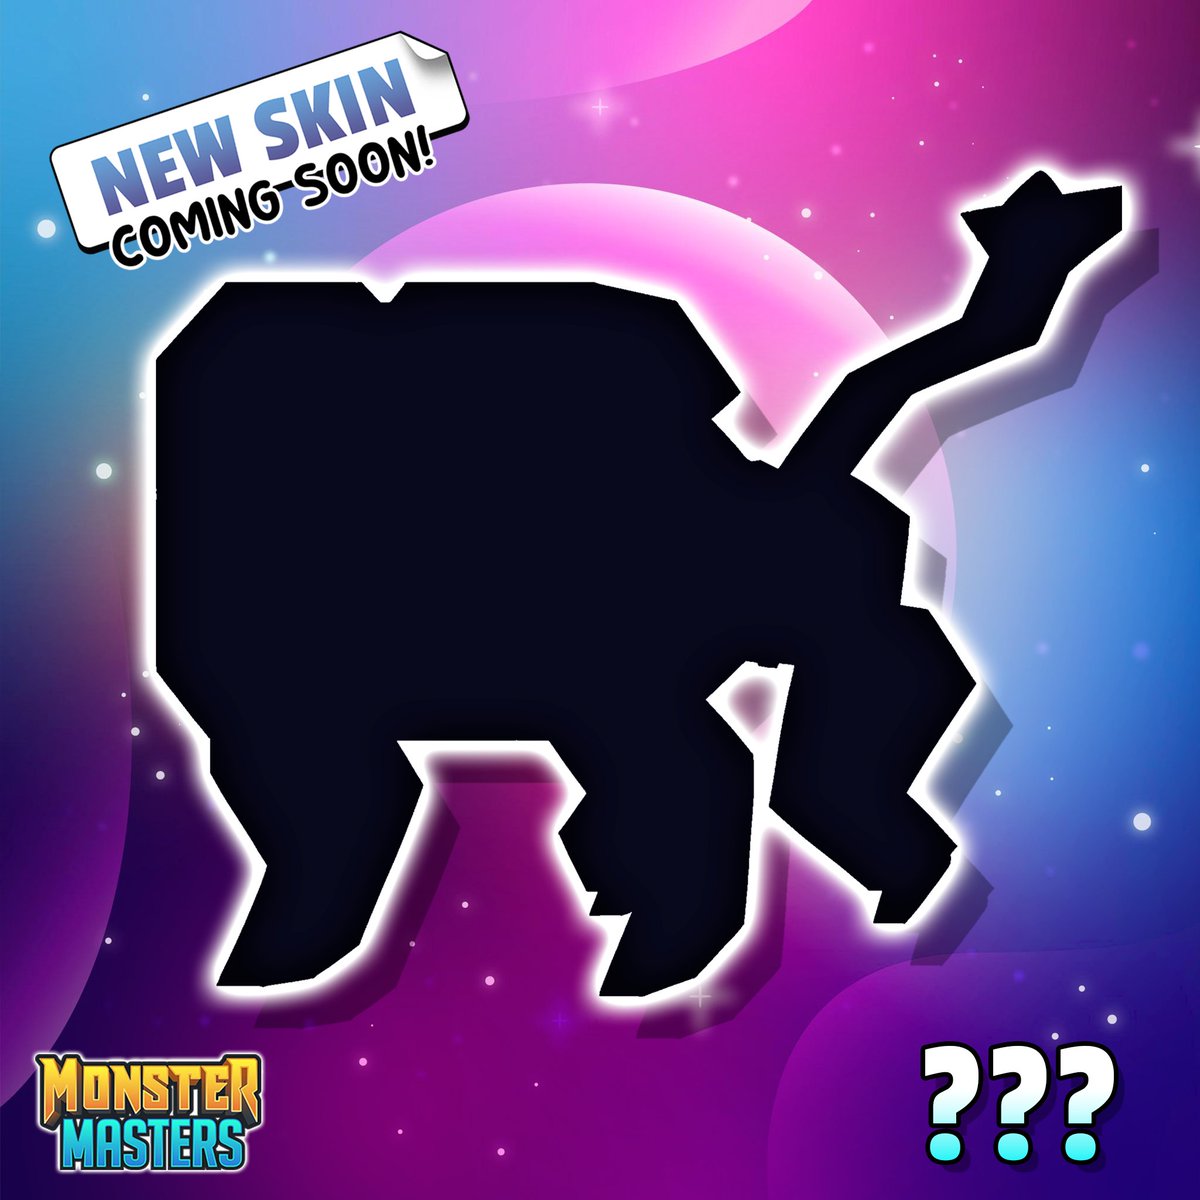 One more new brand new skin coming soon to Monster Masters! 😍Can you guess the name?

#monstermasters #mobilegames #anime #fakemon #pokemon #gaming #games #gameplay #iosgames #androidgames #freetoplay #gamedesign #indiegames #twitch #mobilegaming #monsterbattles